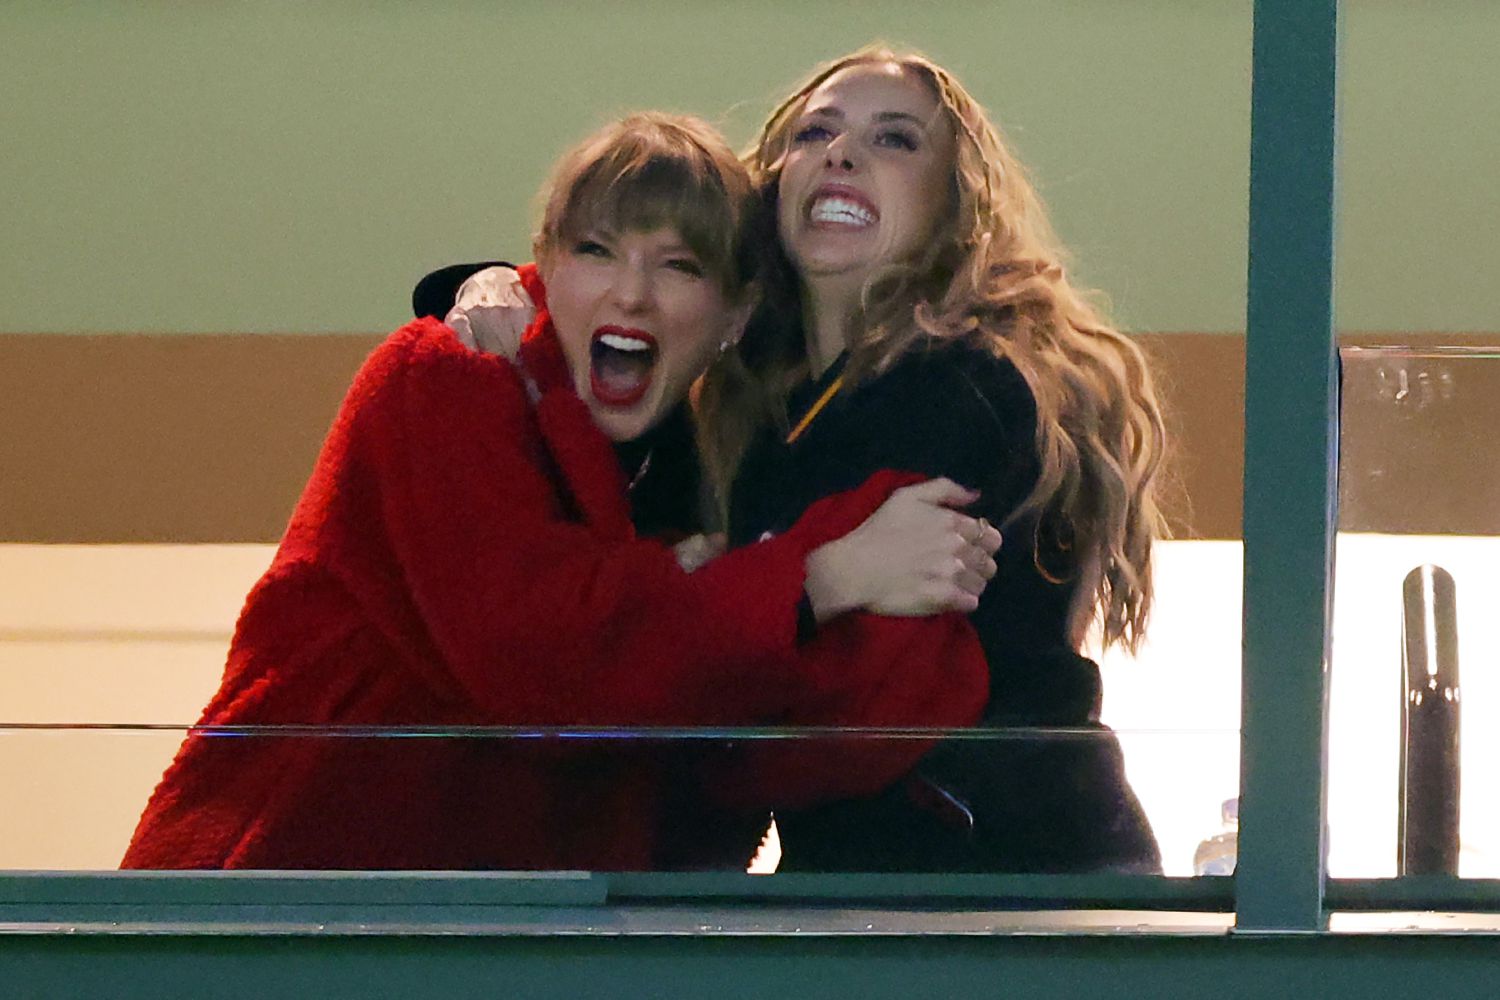 Taylor Swift Responds To The List Of NFL Wives Who Are The Most Supportive, Including Brittany Mahomes "She deserves it; it's so cute that she's bringing all of her kids to support their dad." - Mnews